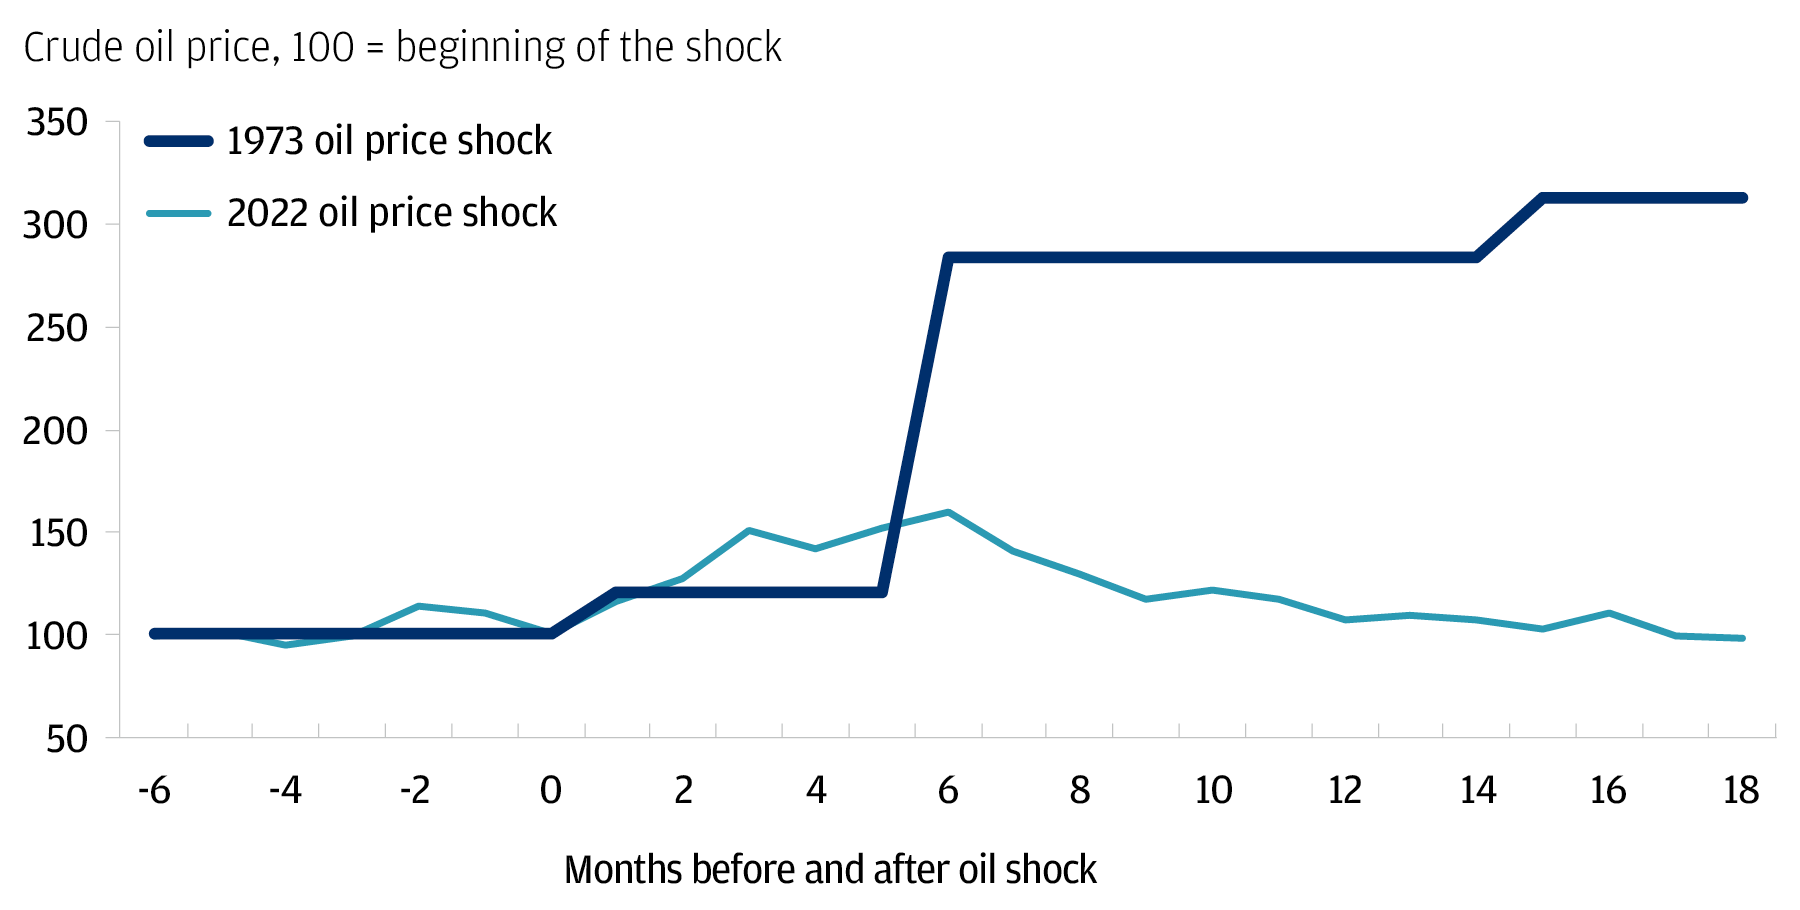 The chart describes oil price performance before and after the 1973 oil price shock and the 2022 oil price shock. Both lines are indexed at 100 for the time when the shock happened.